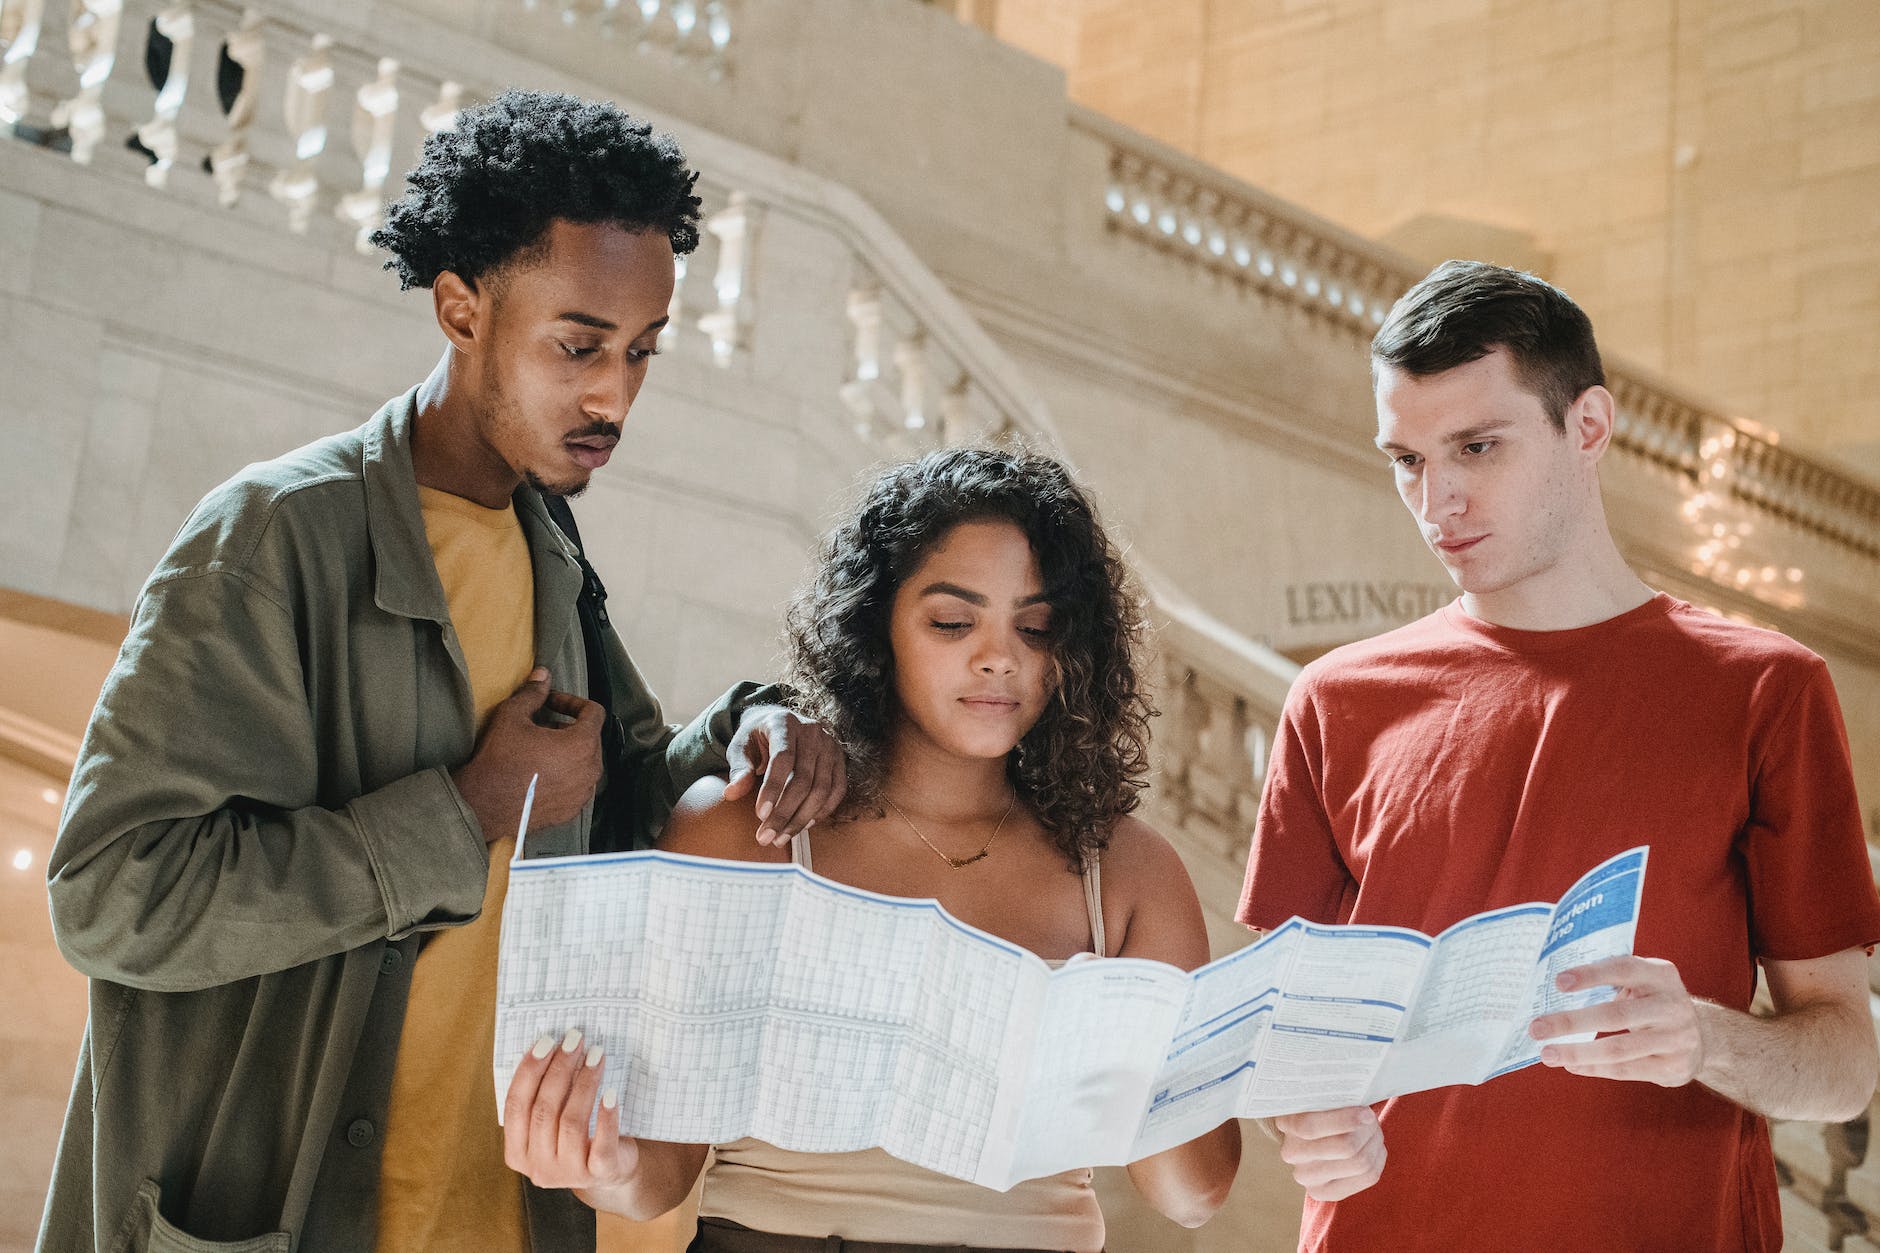 serious young diverse millennials reading map in railway station terminal